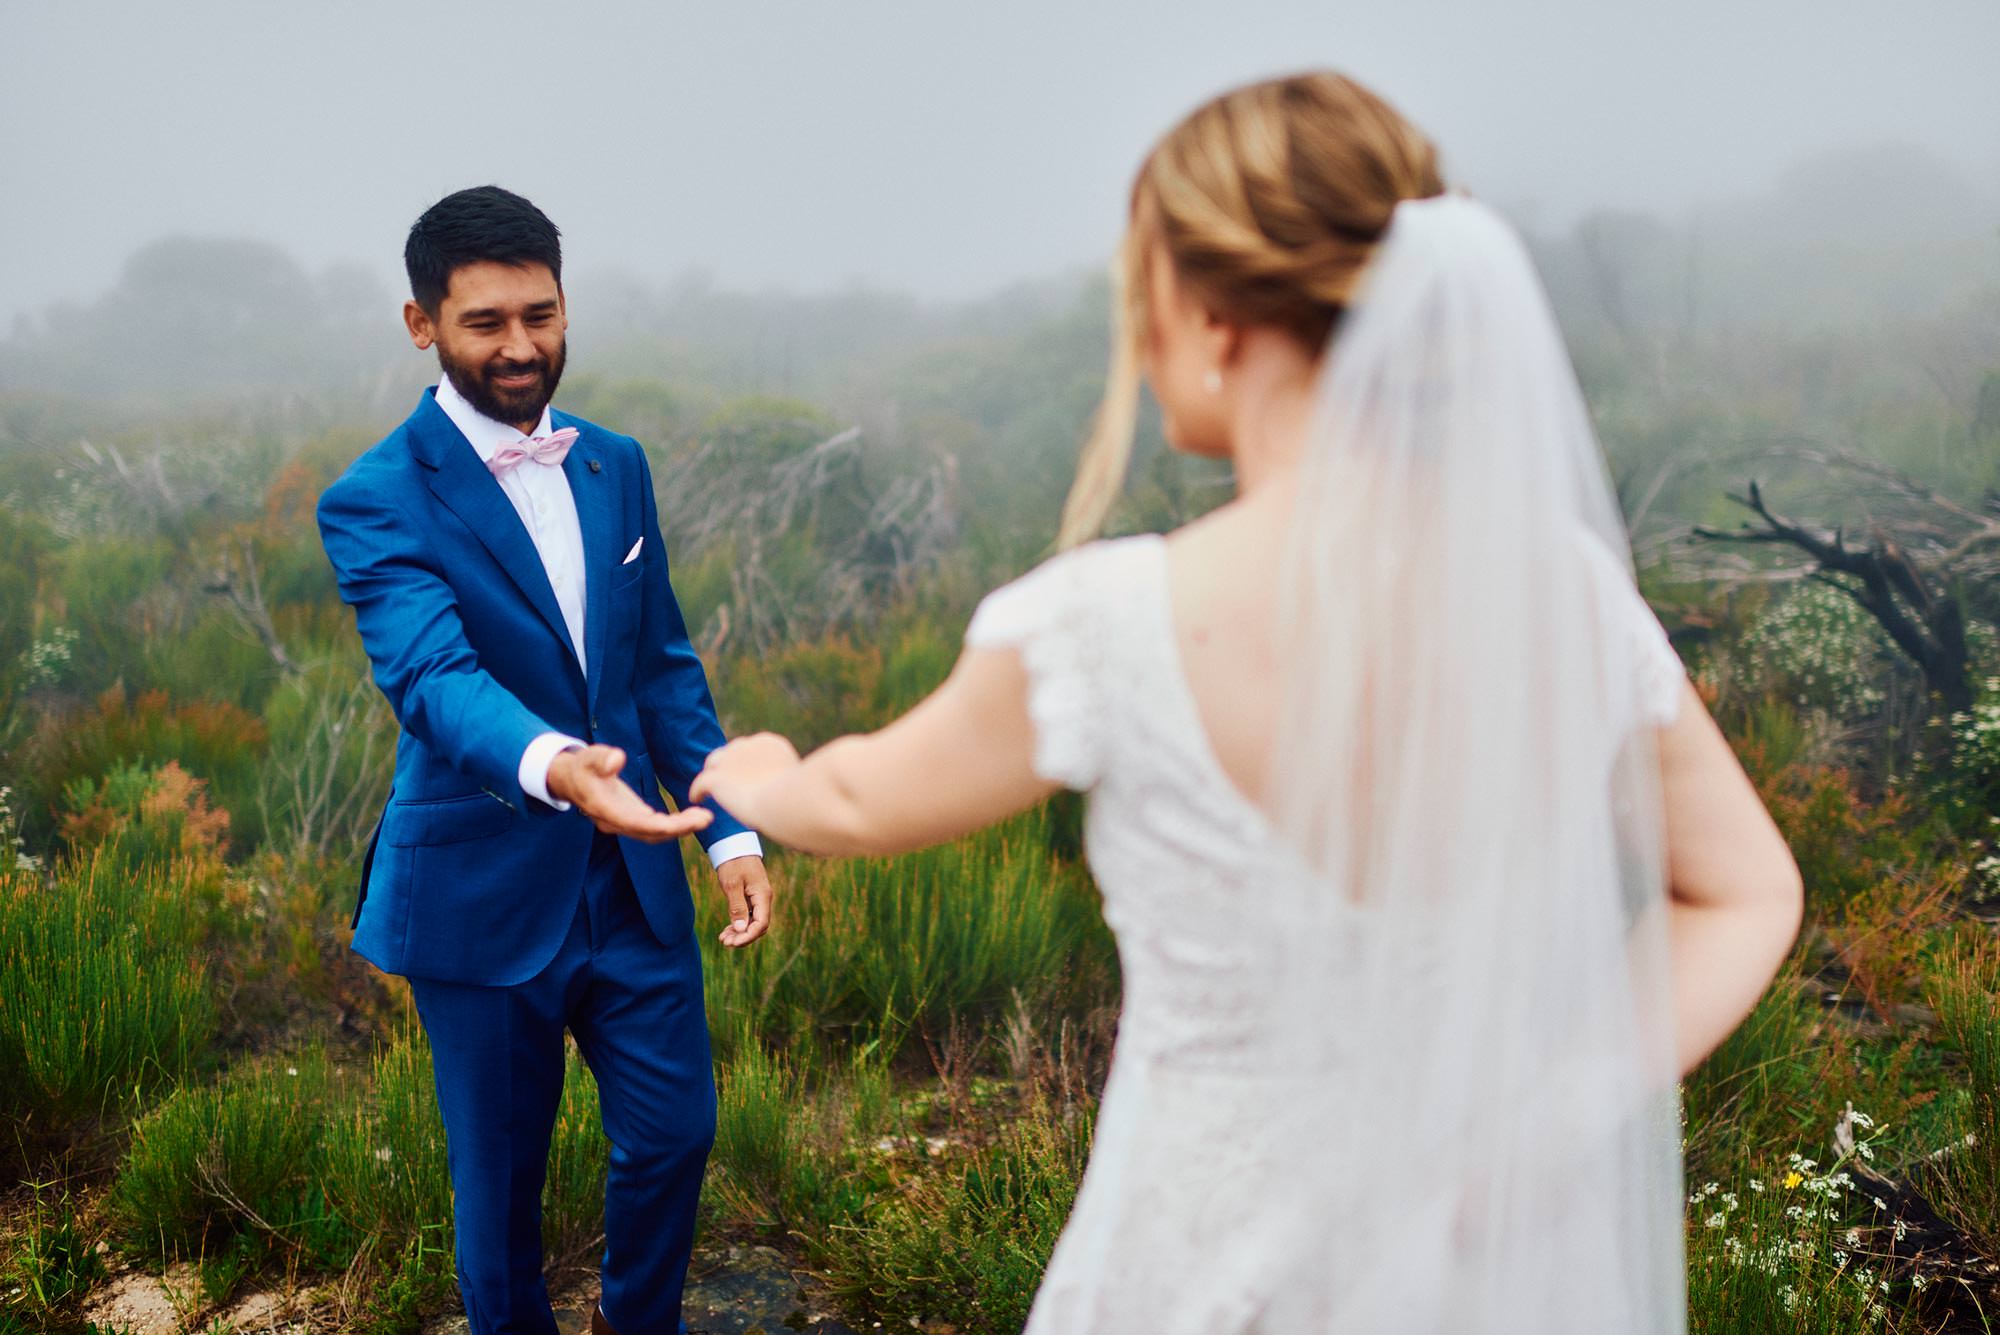 Dancing in the mist of the Blue Mountains on their wedding day